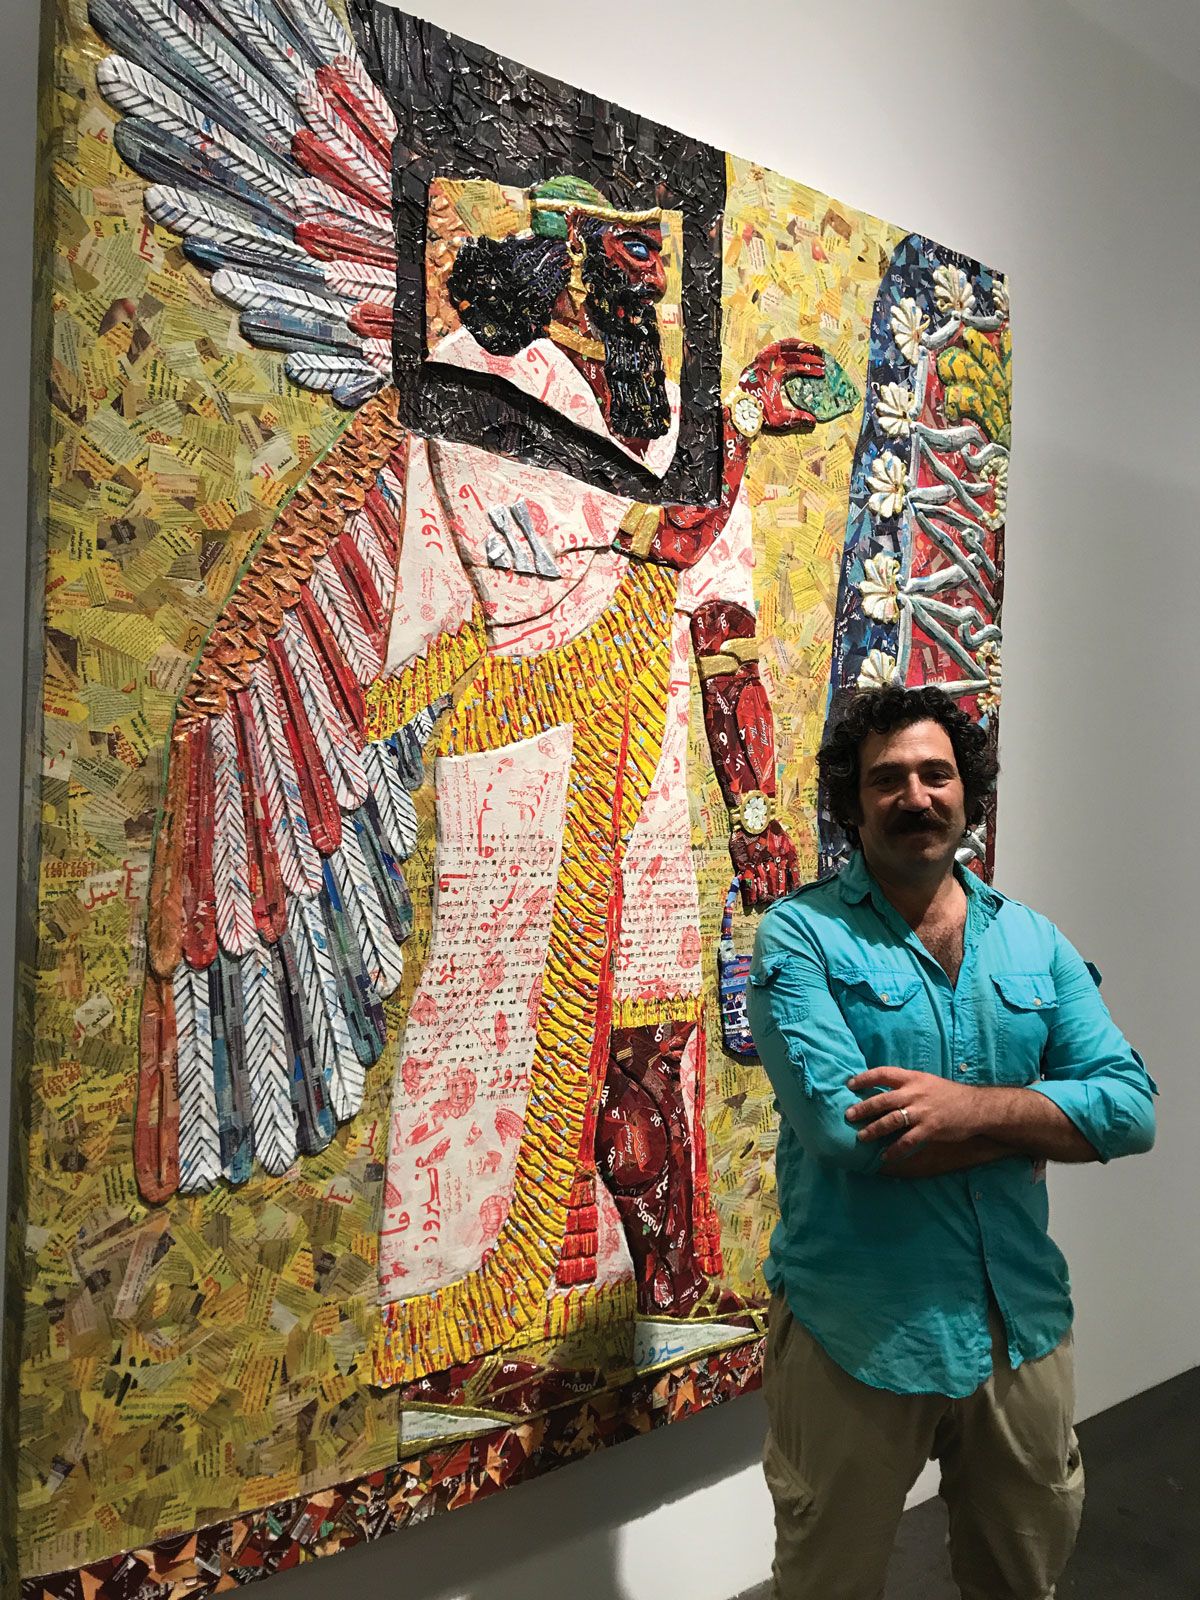 Michael Rakowitz with his work at Art Basel, based on a relief from Nimrud David Owens